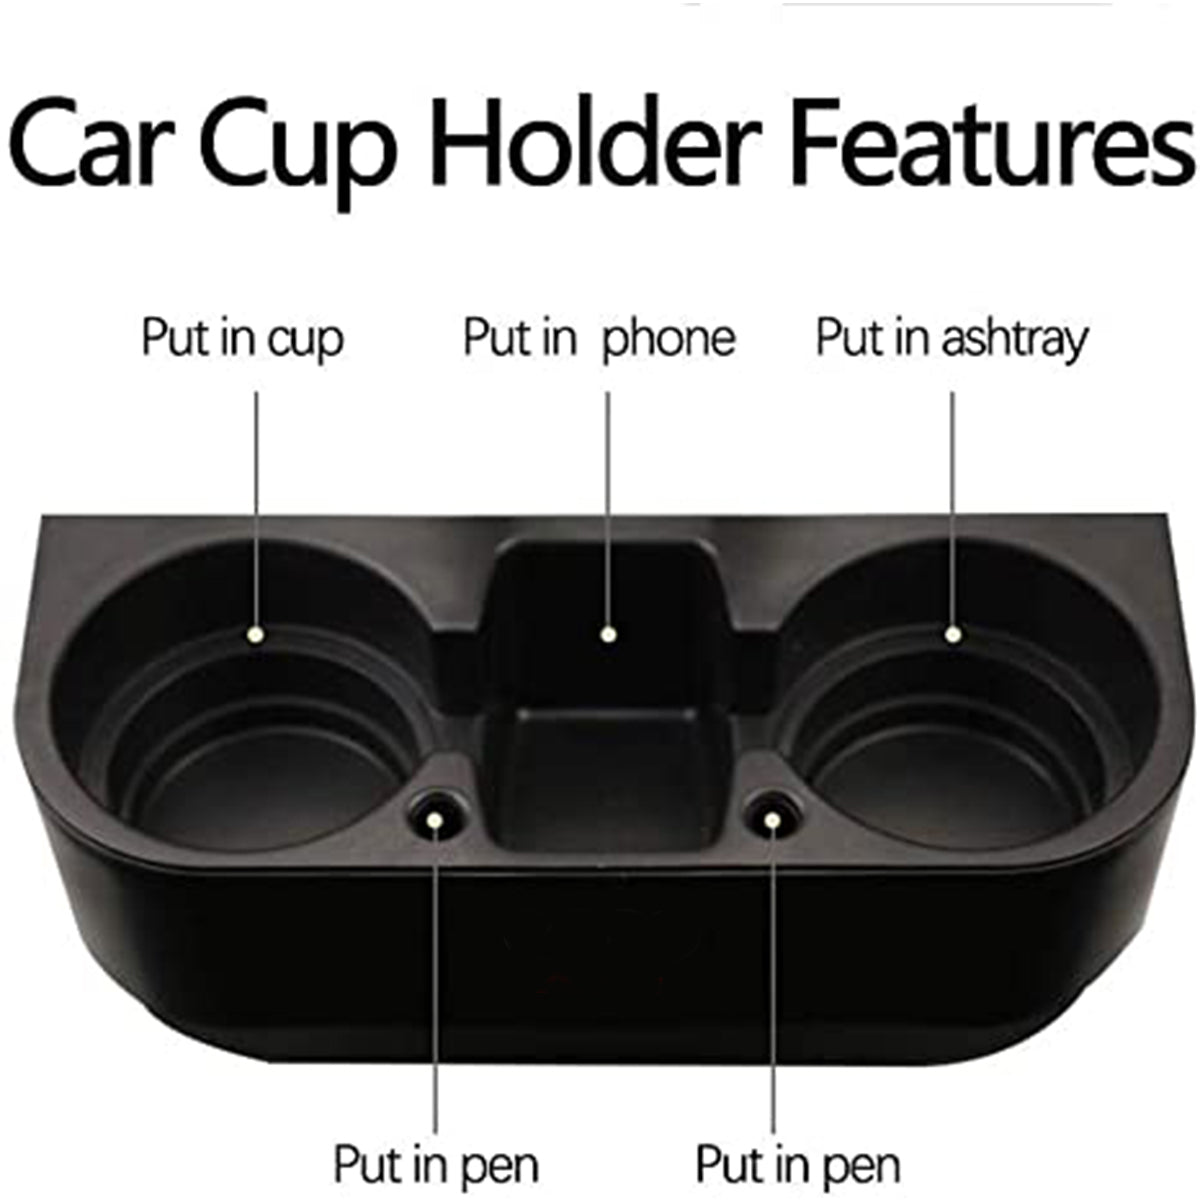 Delicate Leather Cup Holder Portable Multifunction Vehicle Seat Cup Cell Phone Drinks Holder Box Car Interior Organizer, Custom For Your Cars, Car Accessories FT11995 - Delicate Leather